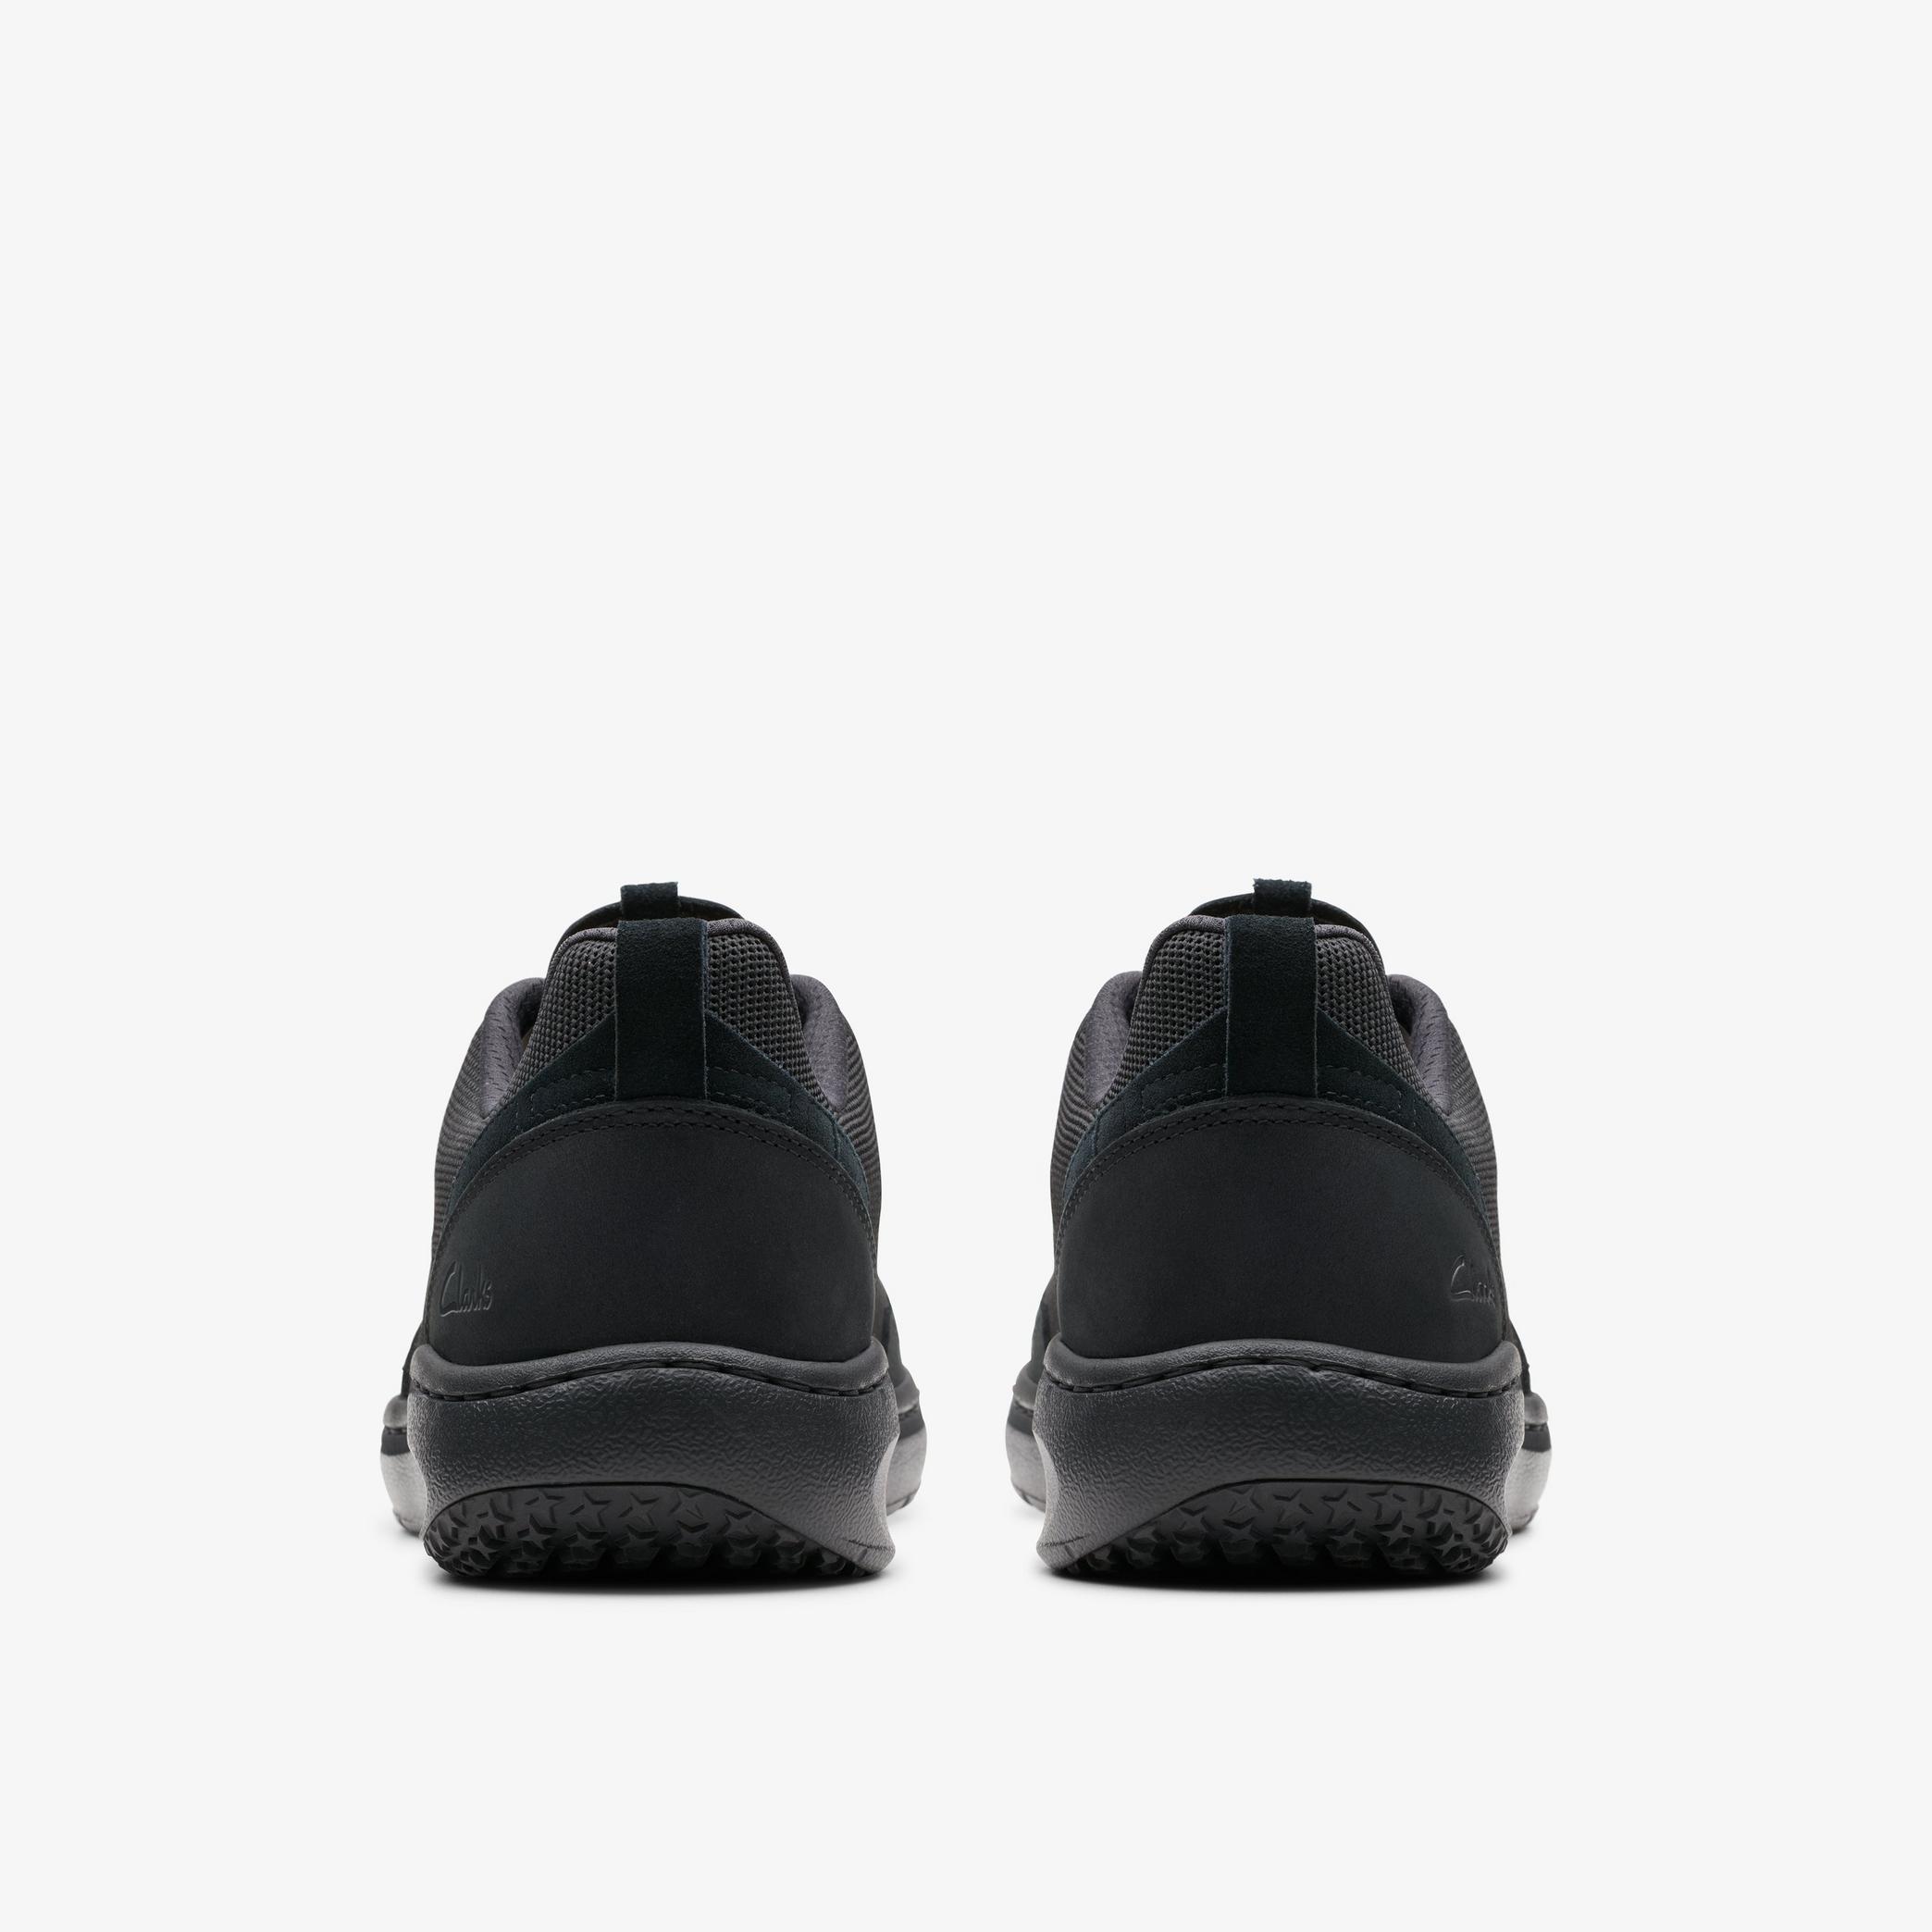 Clarks Pro Knit Black Shoes, view 5 of 6